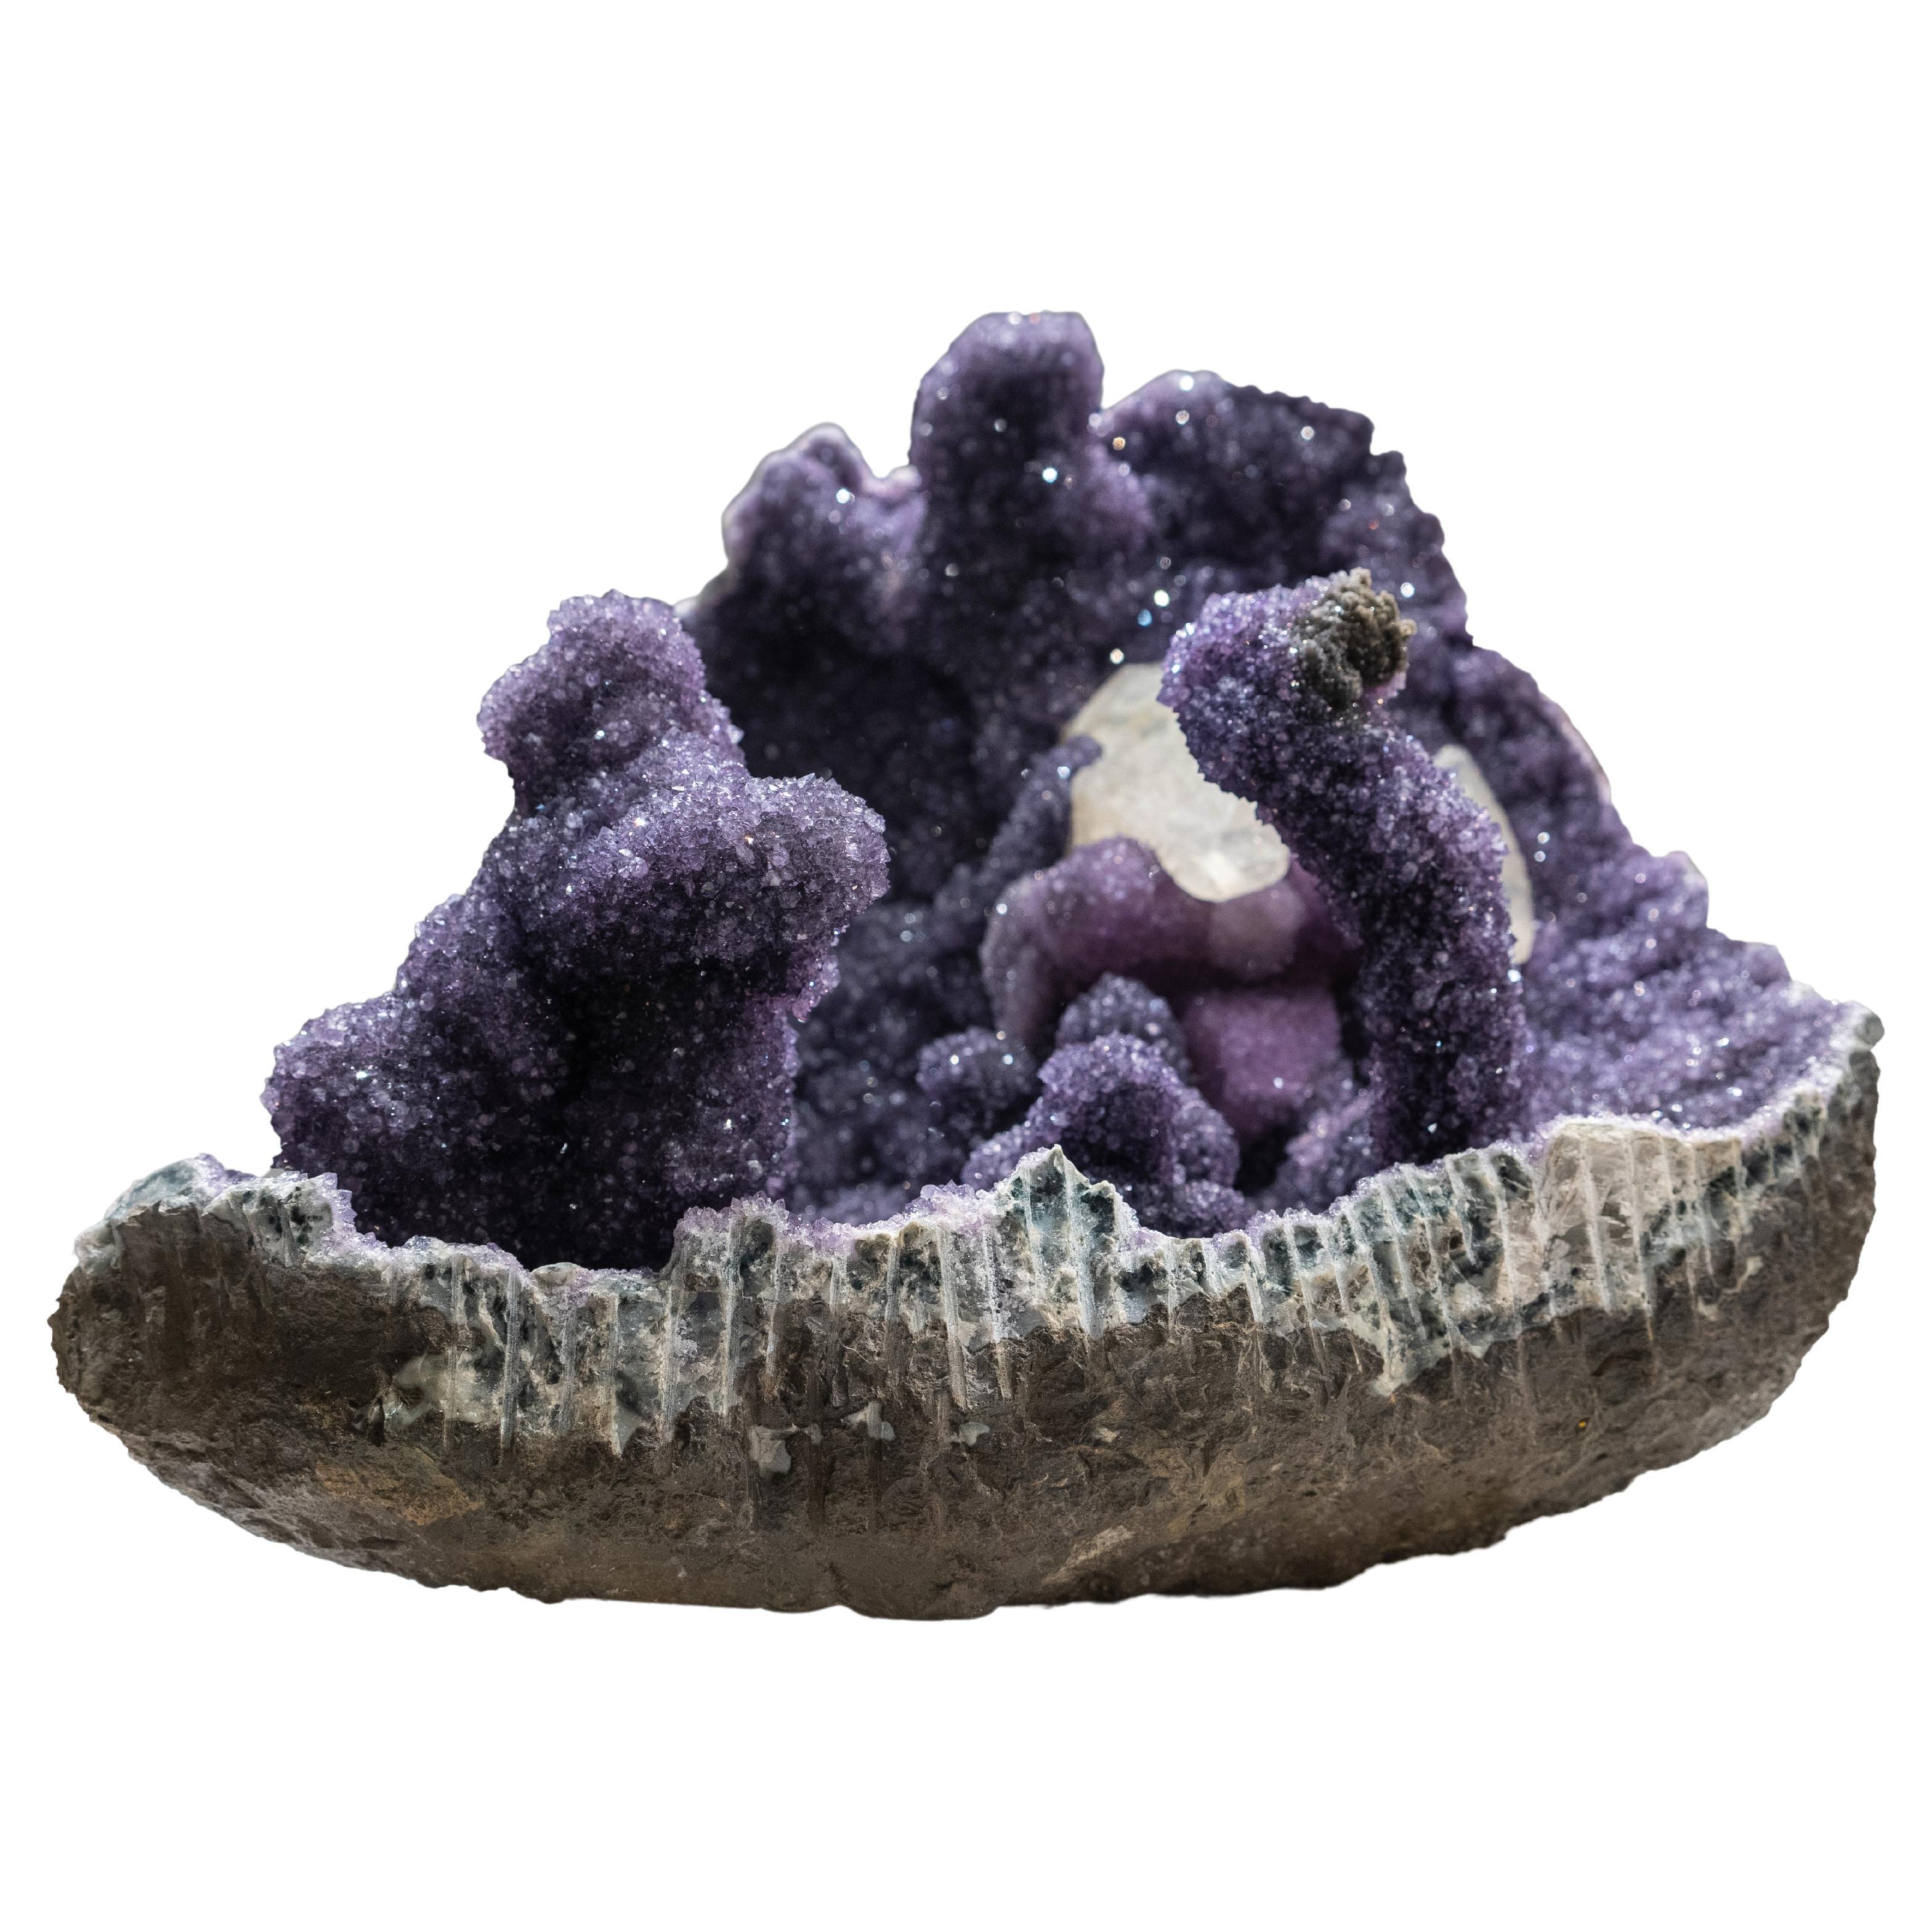 Amethyst Geode Stalactites Cluster with Calcite from Uruguay ( 13"Tall, 25 lbs.)